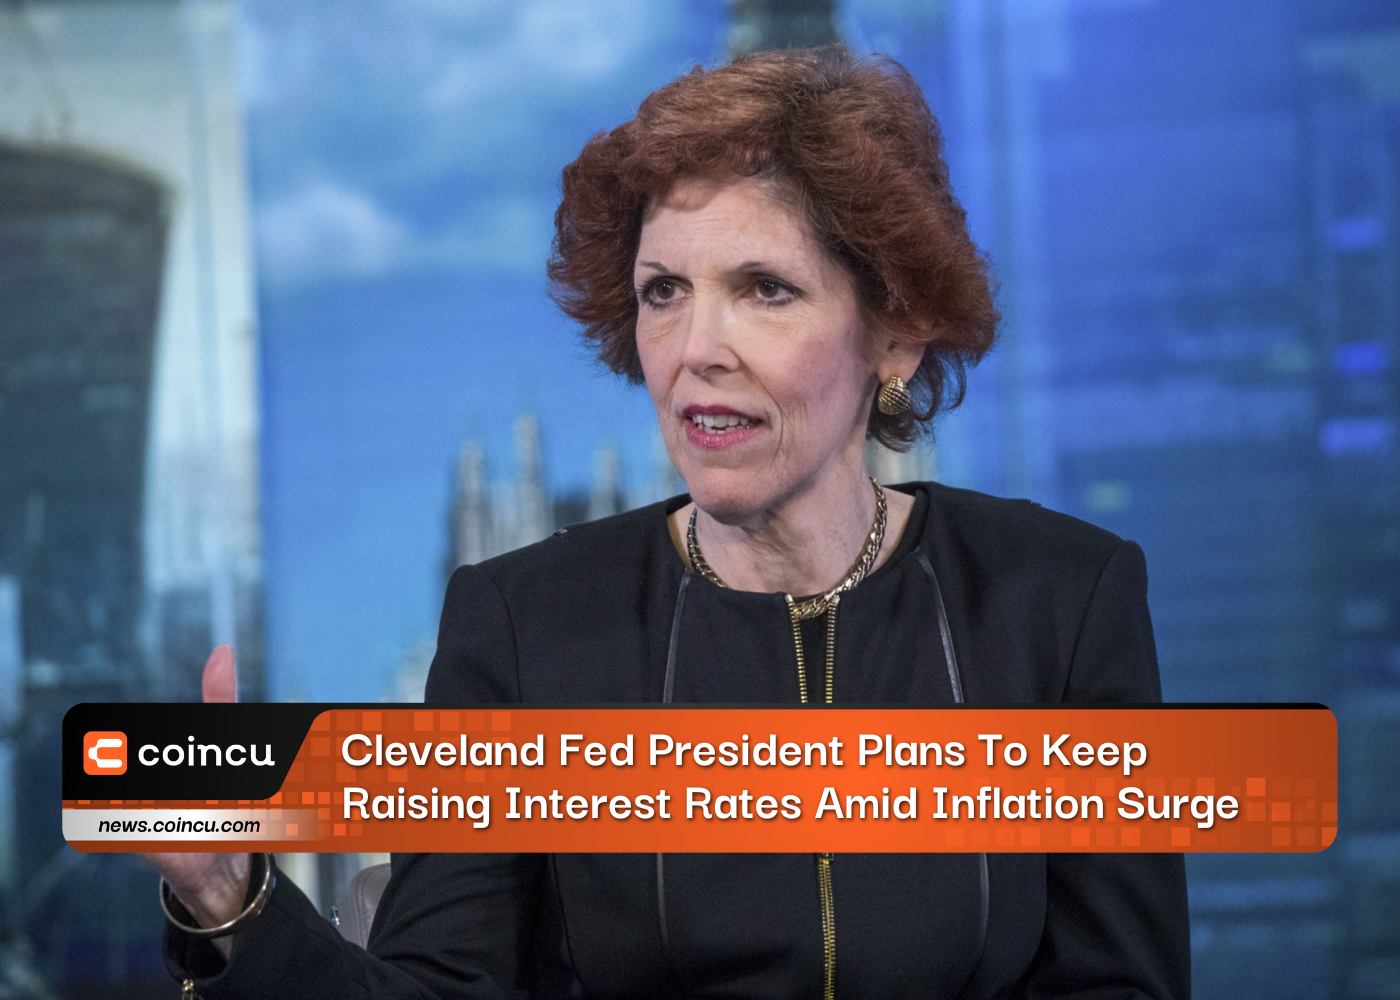 Cleveland Fed President Plans To Keep Raising Interest Rates Amid Inflation Surge